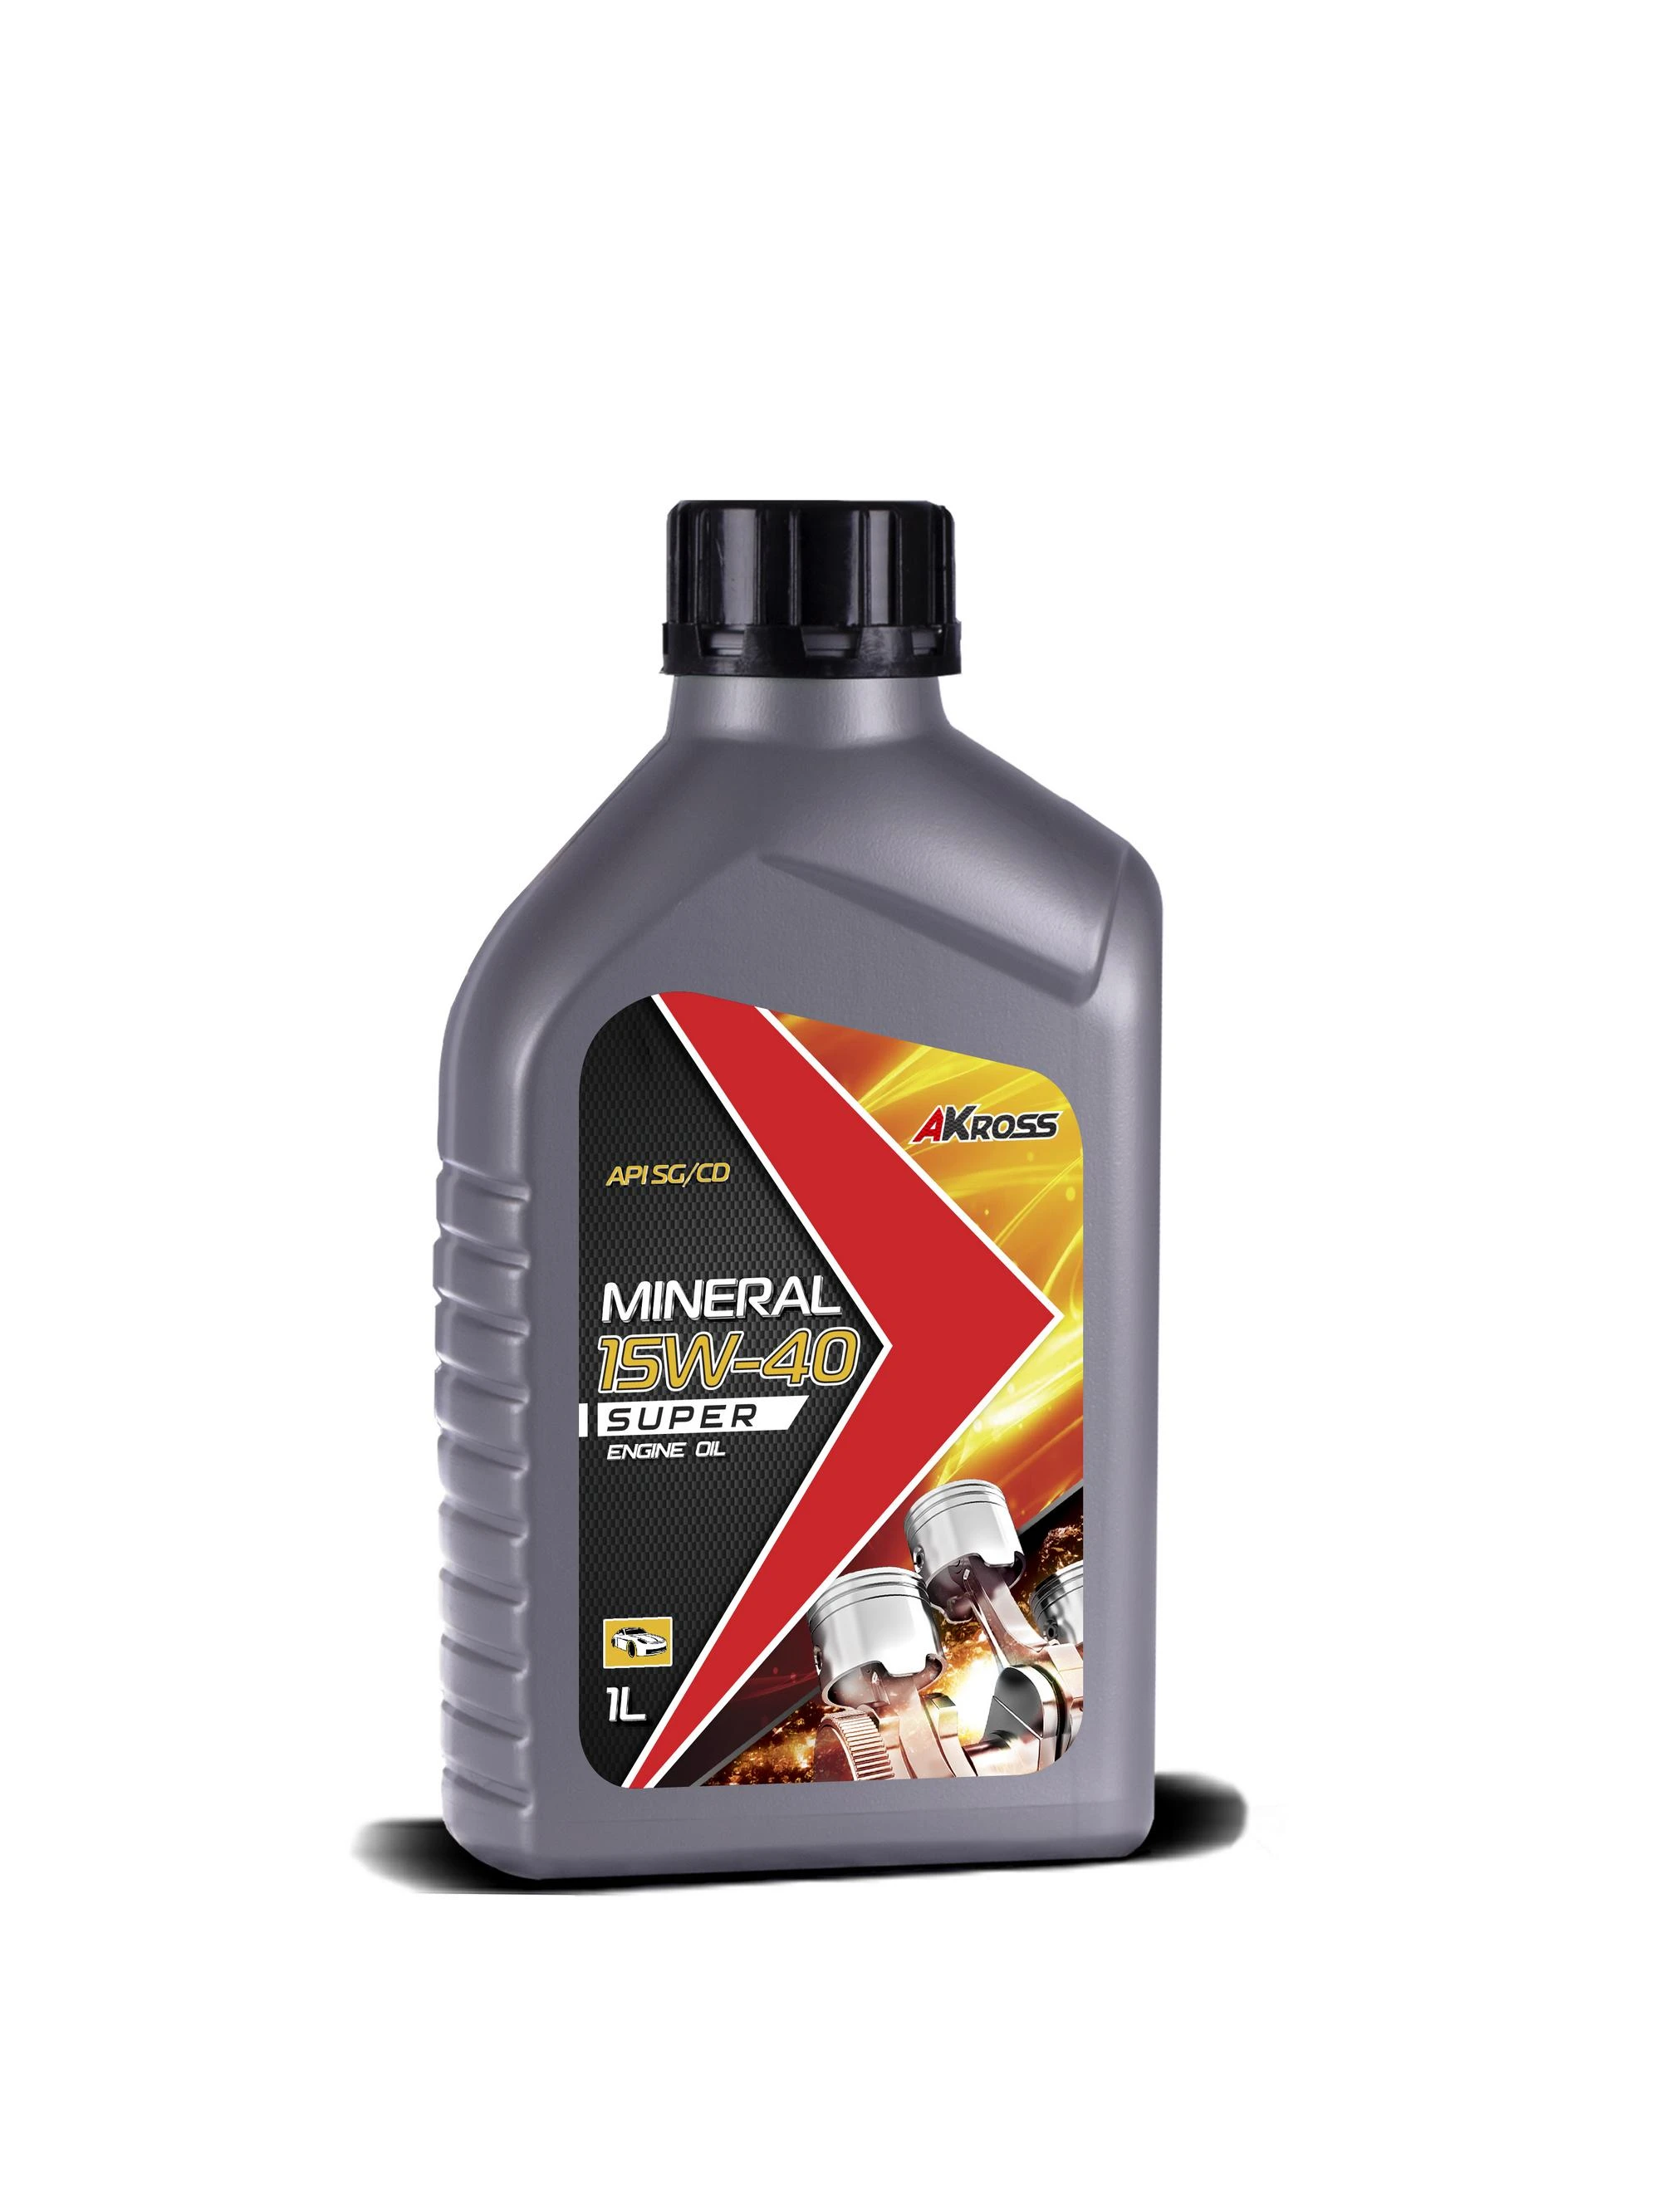 High quality multigrade mineral motor oil lubricant protects engine